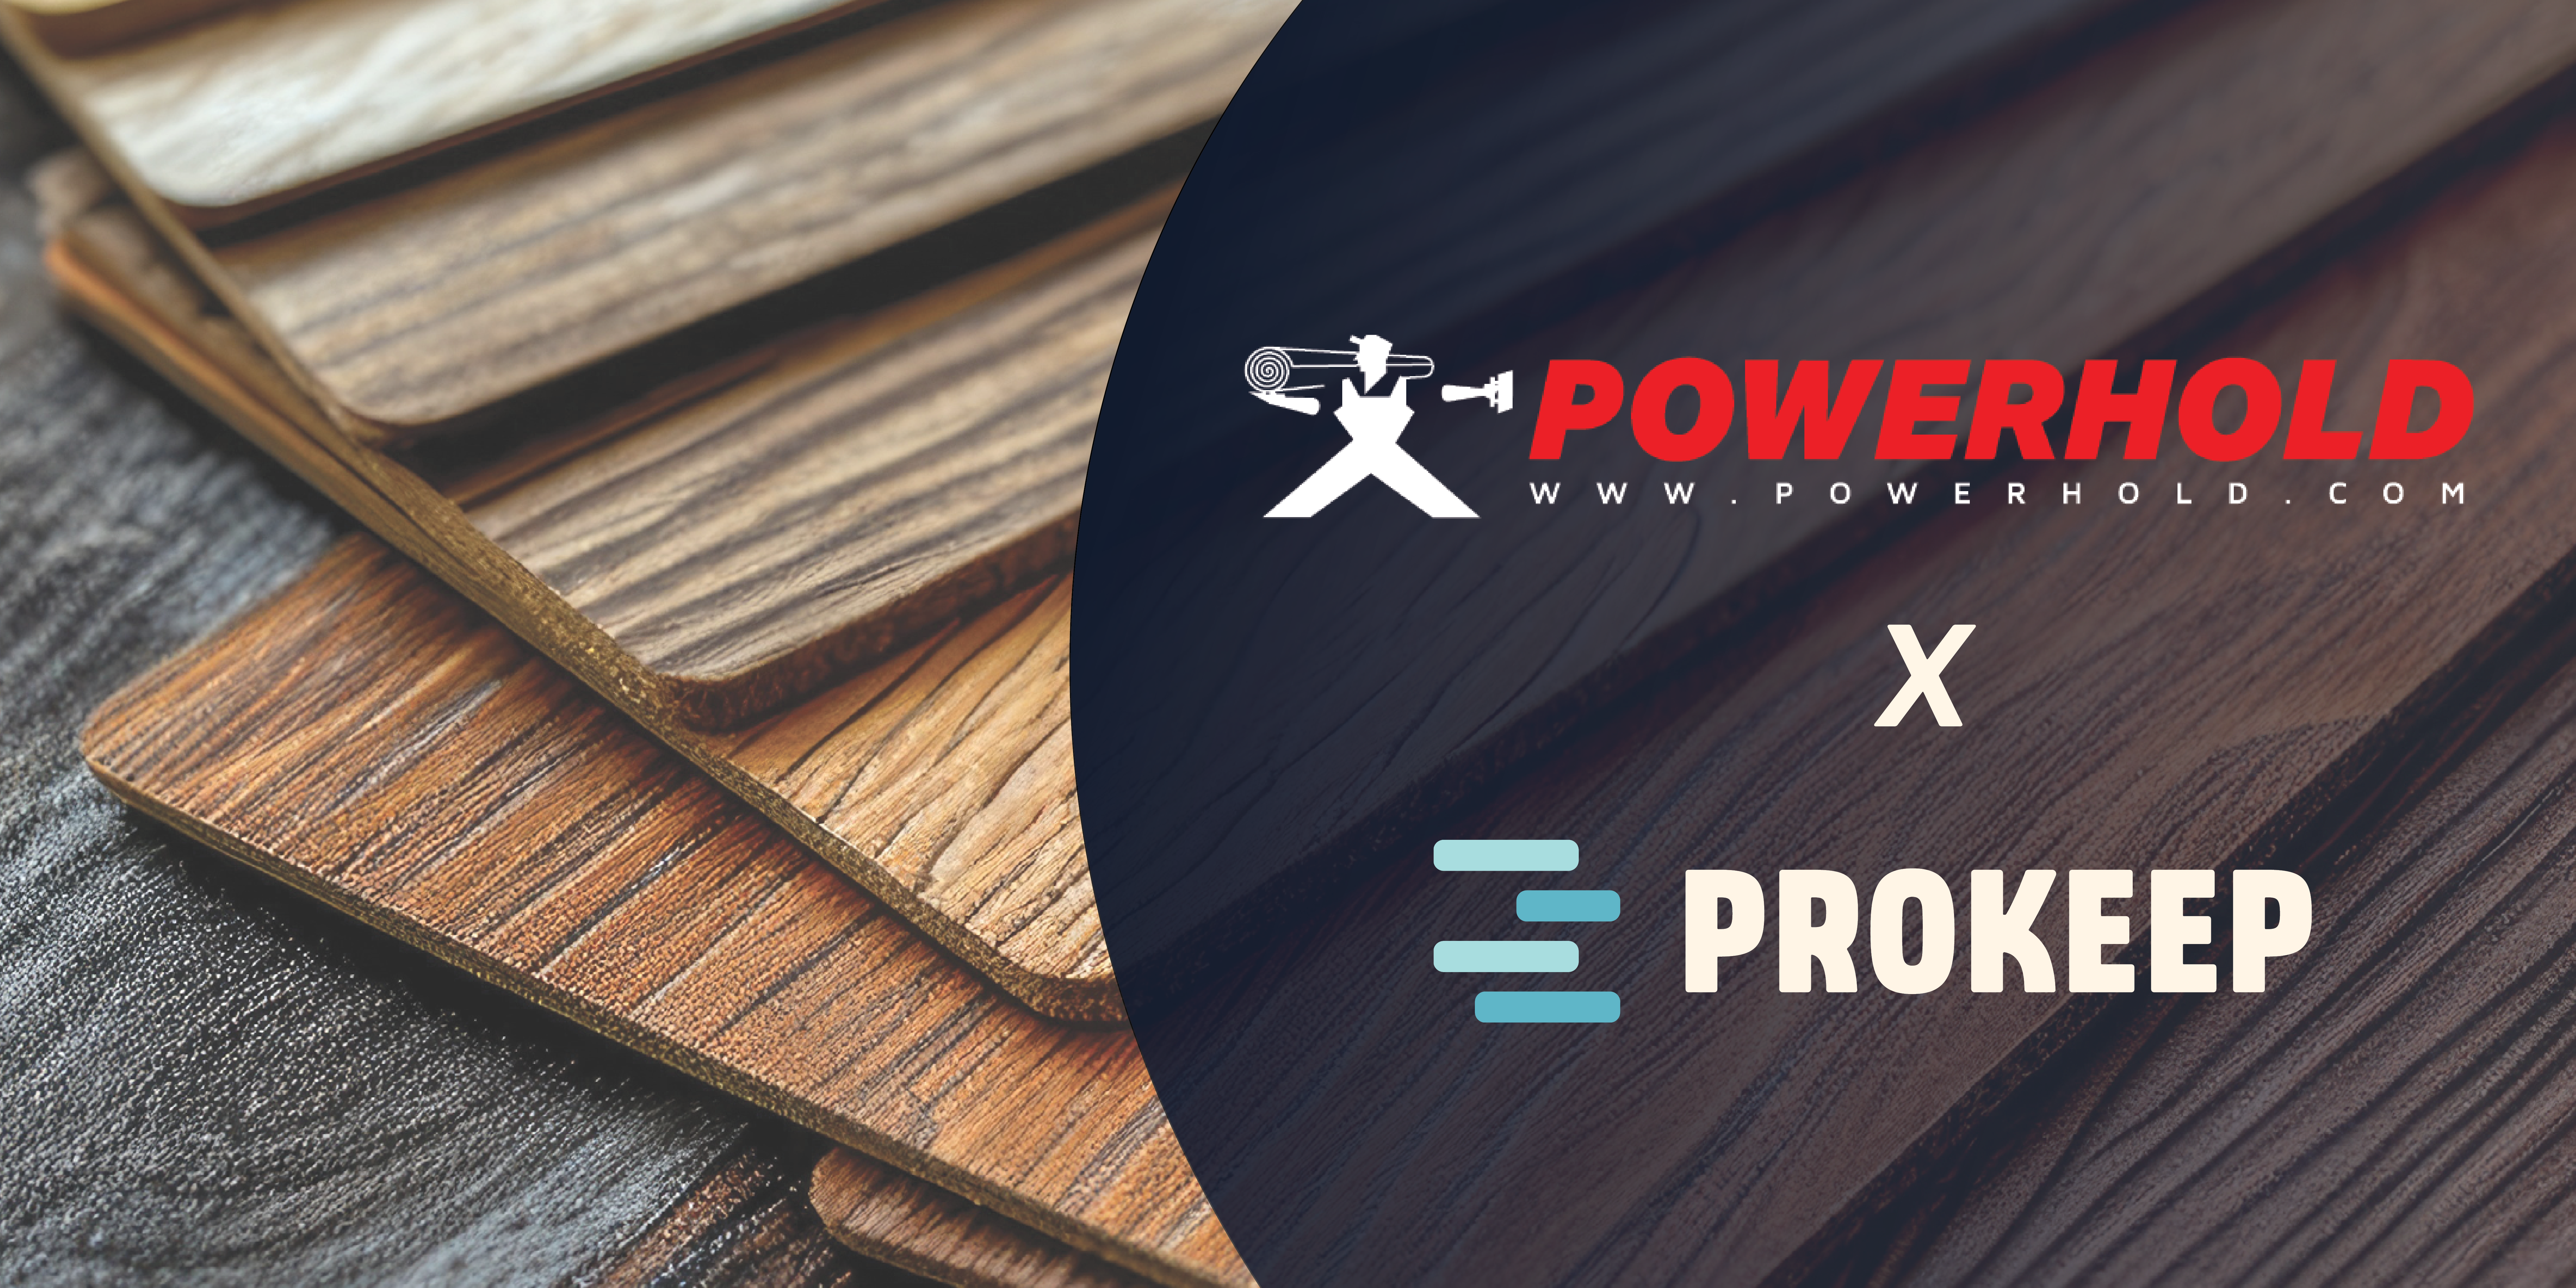 Powerhold Partners with Prokeep to Supply Members with Deal on Leading Communication Solution thumbnail